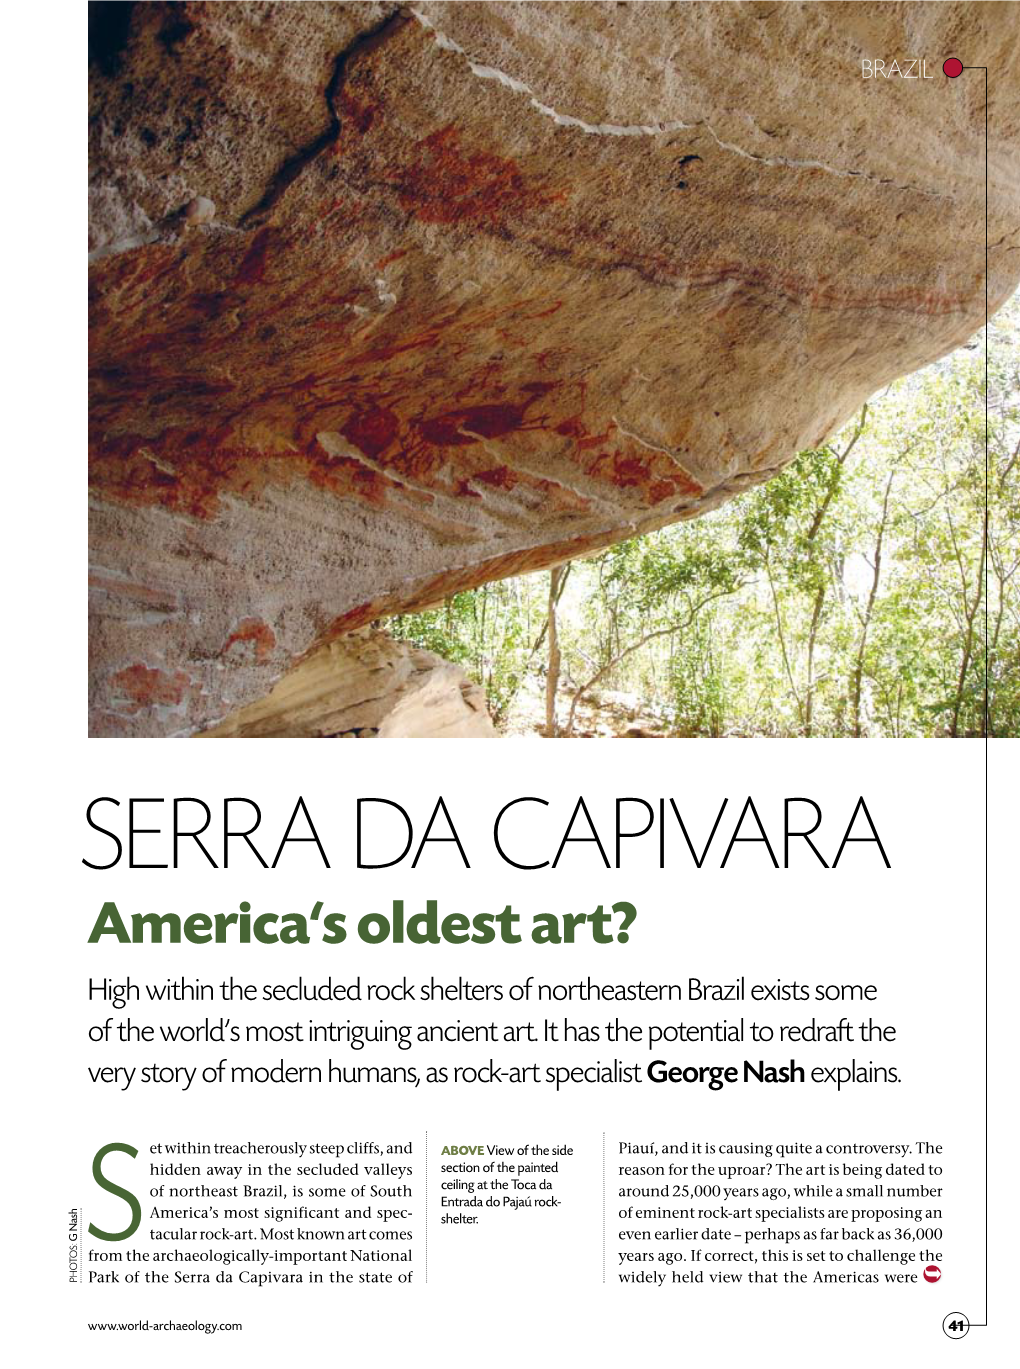 Serra Da Capivara America‘S Oldest Art? High Within the Secluded Rock Shelters of Northeastern Brazil Exists Some of the World’S Most Intriguing Ancient Art